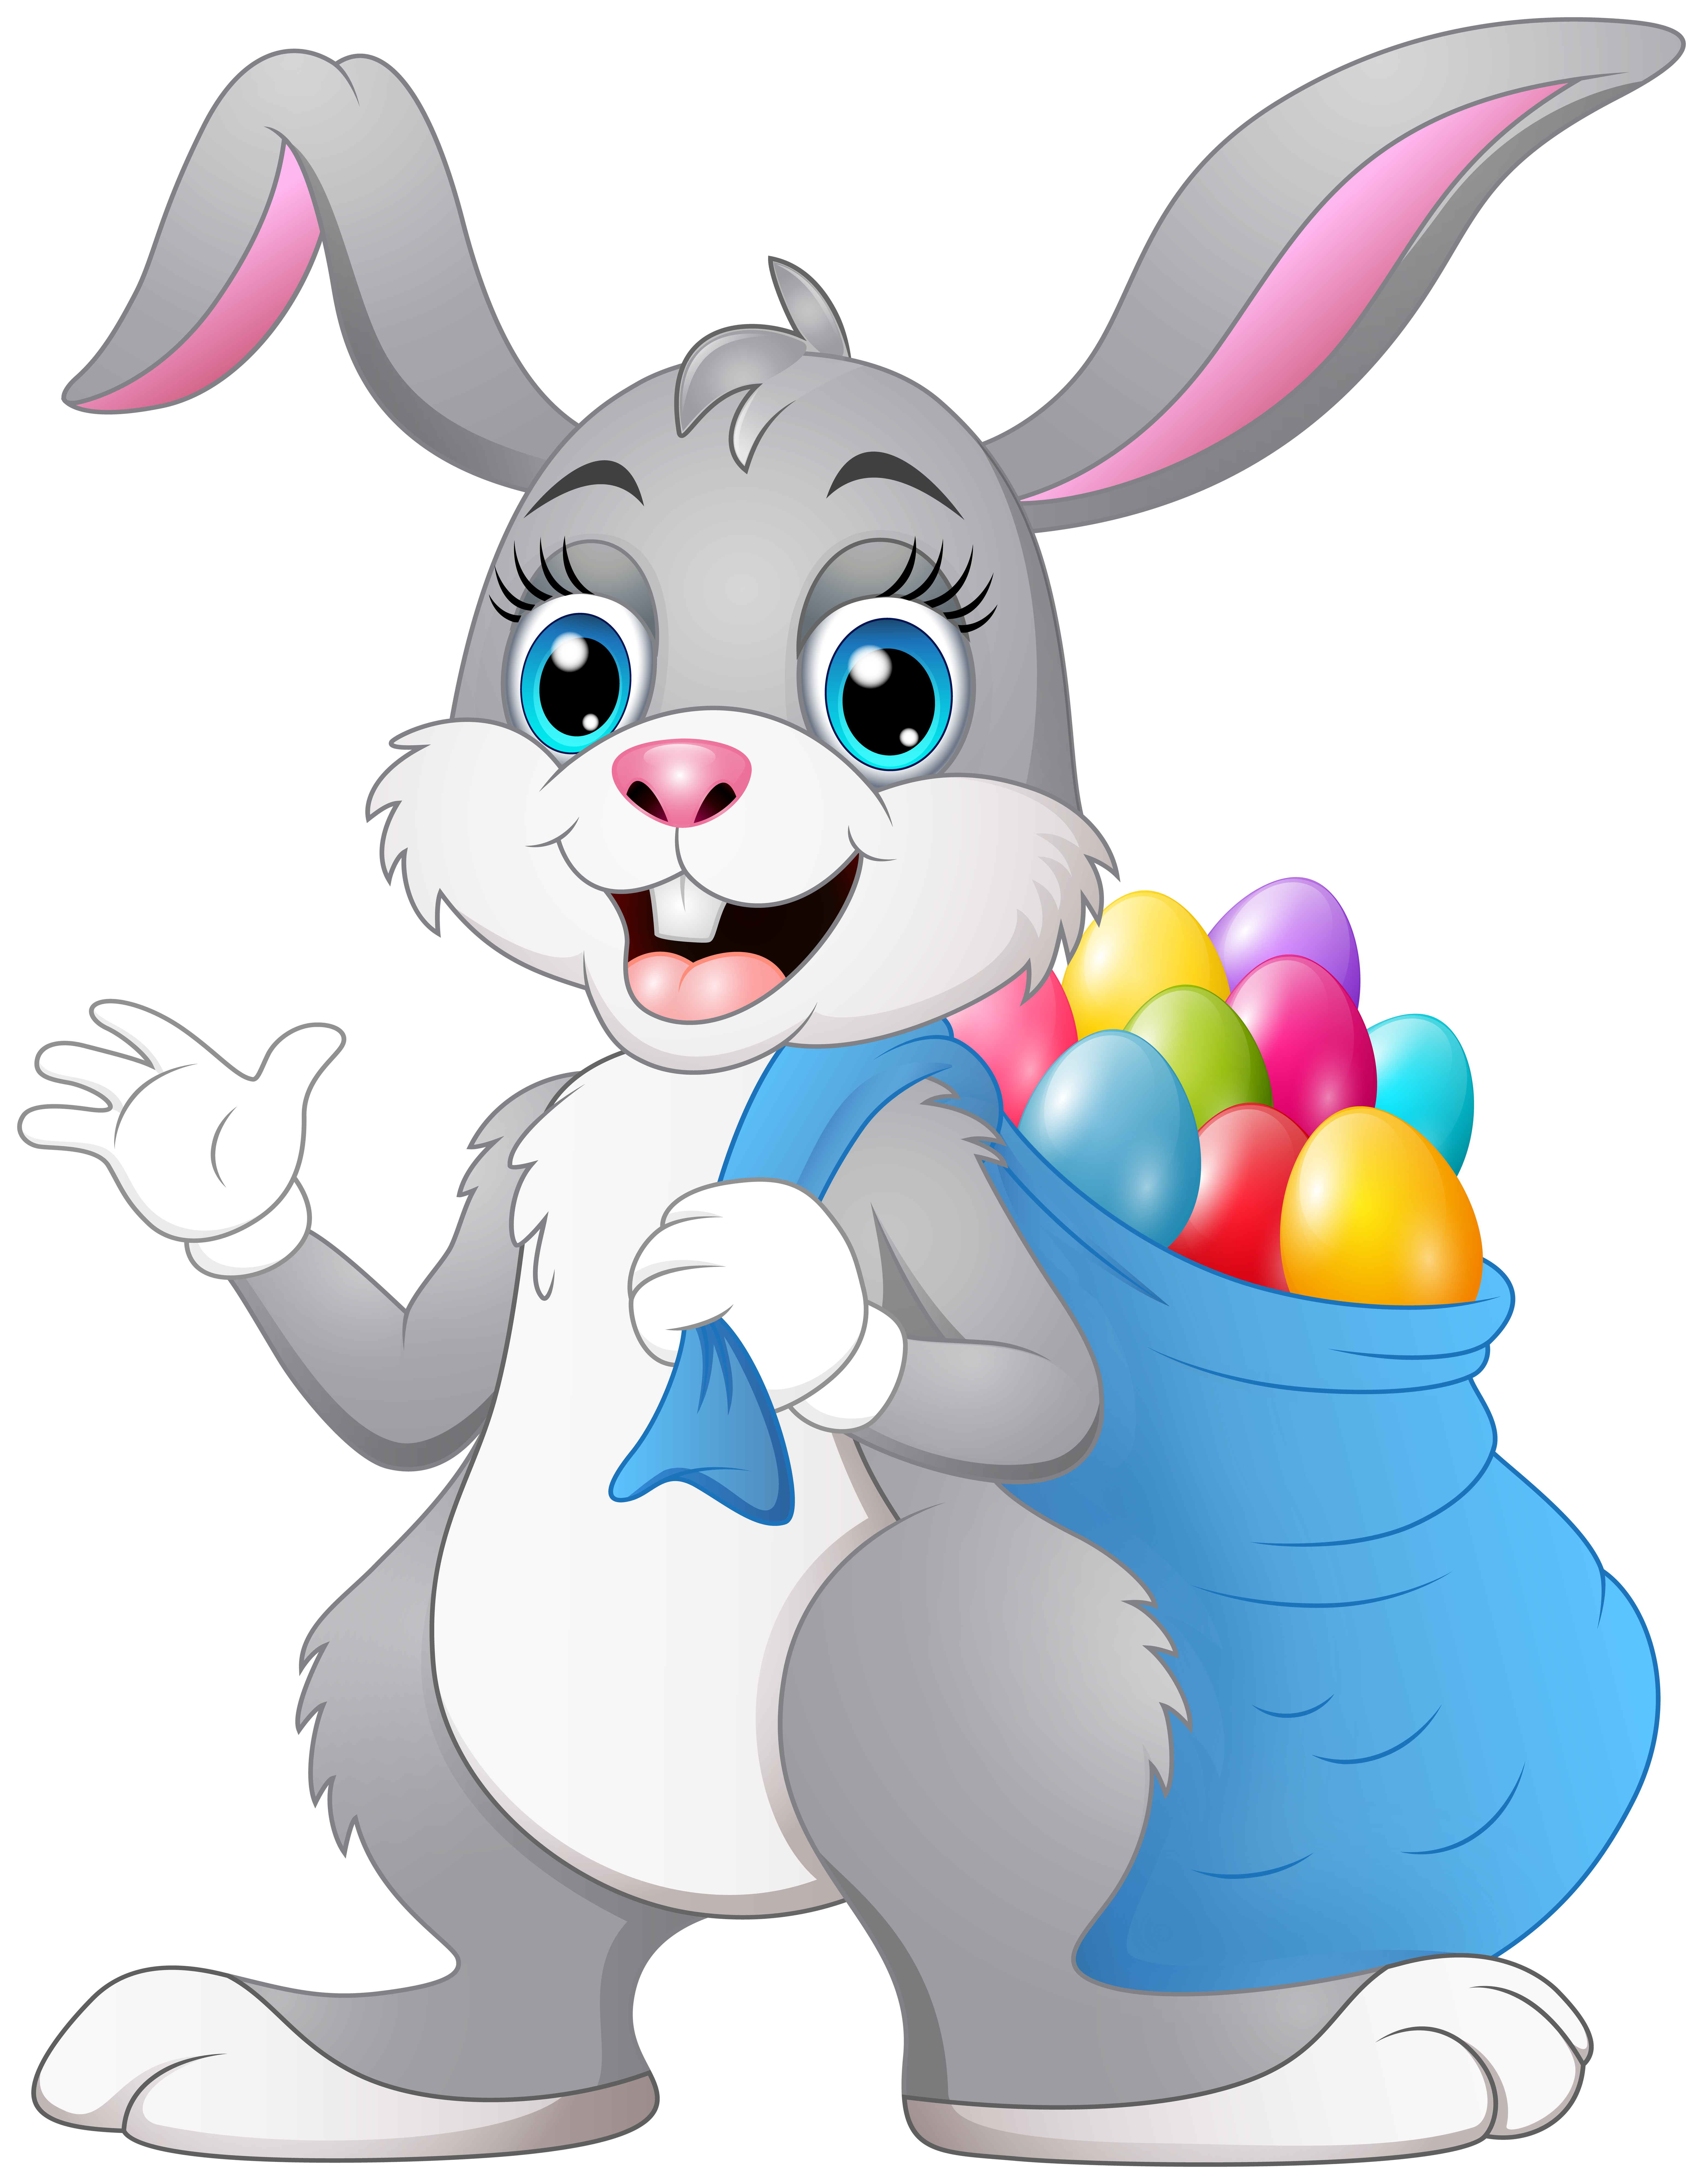 https://gallery.yopriceville.com/var/albums/Free-Clipart-Pictures/Easter-Pictures-PNG/Cute_Easter_Bunny_Transparent_Image.png?m=1552906221